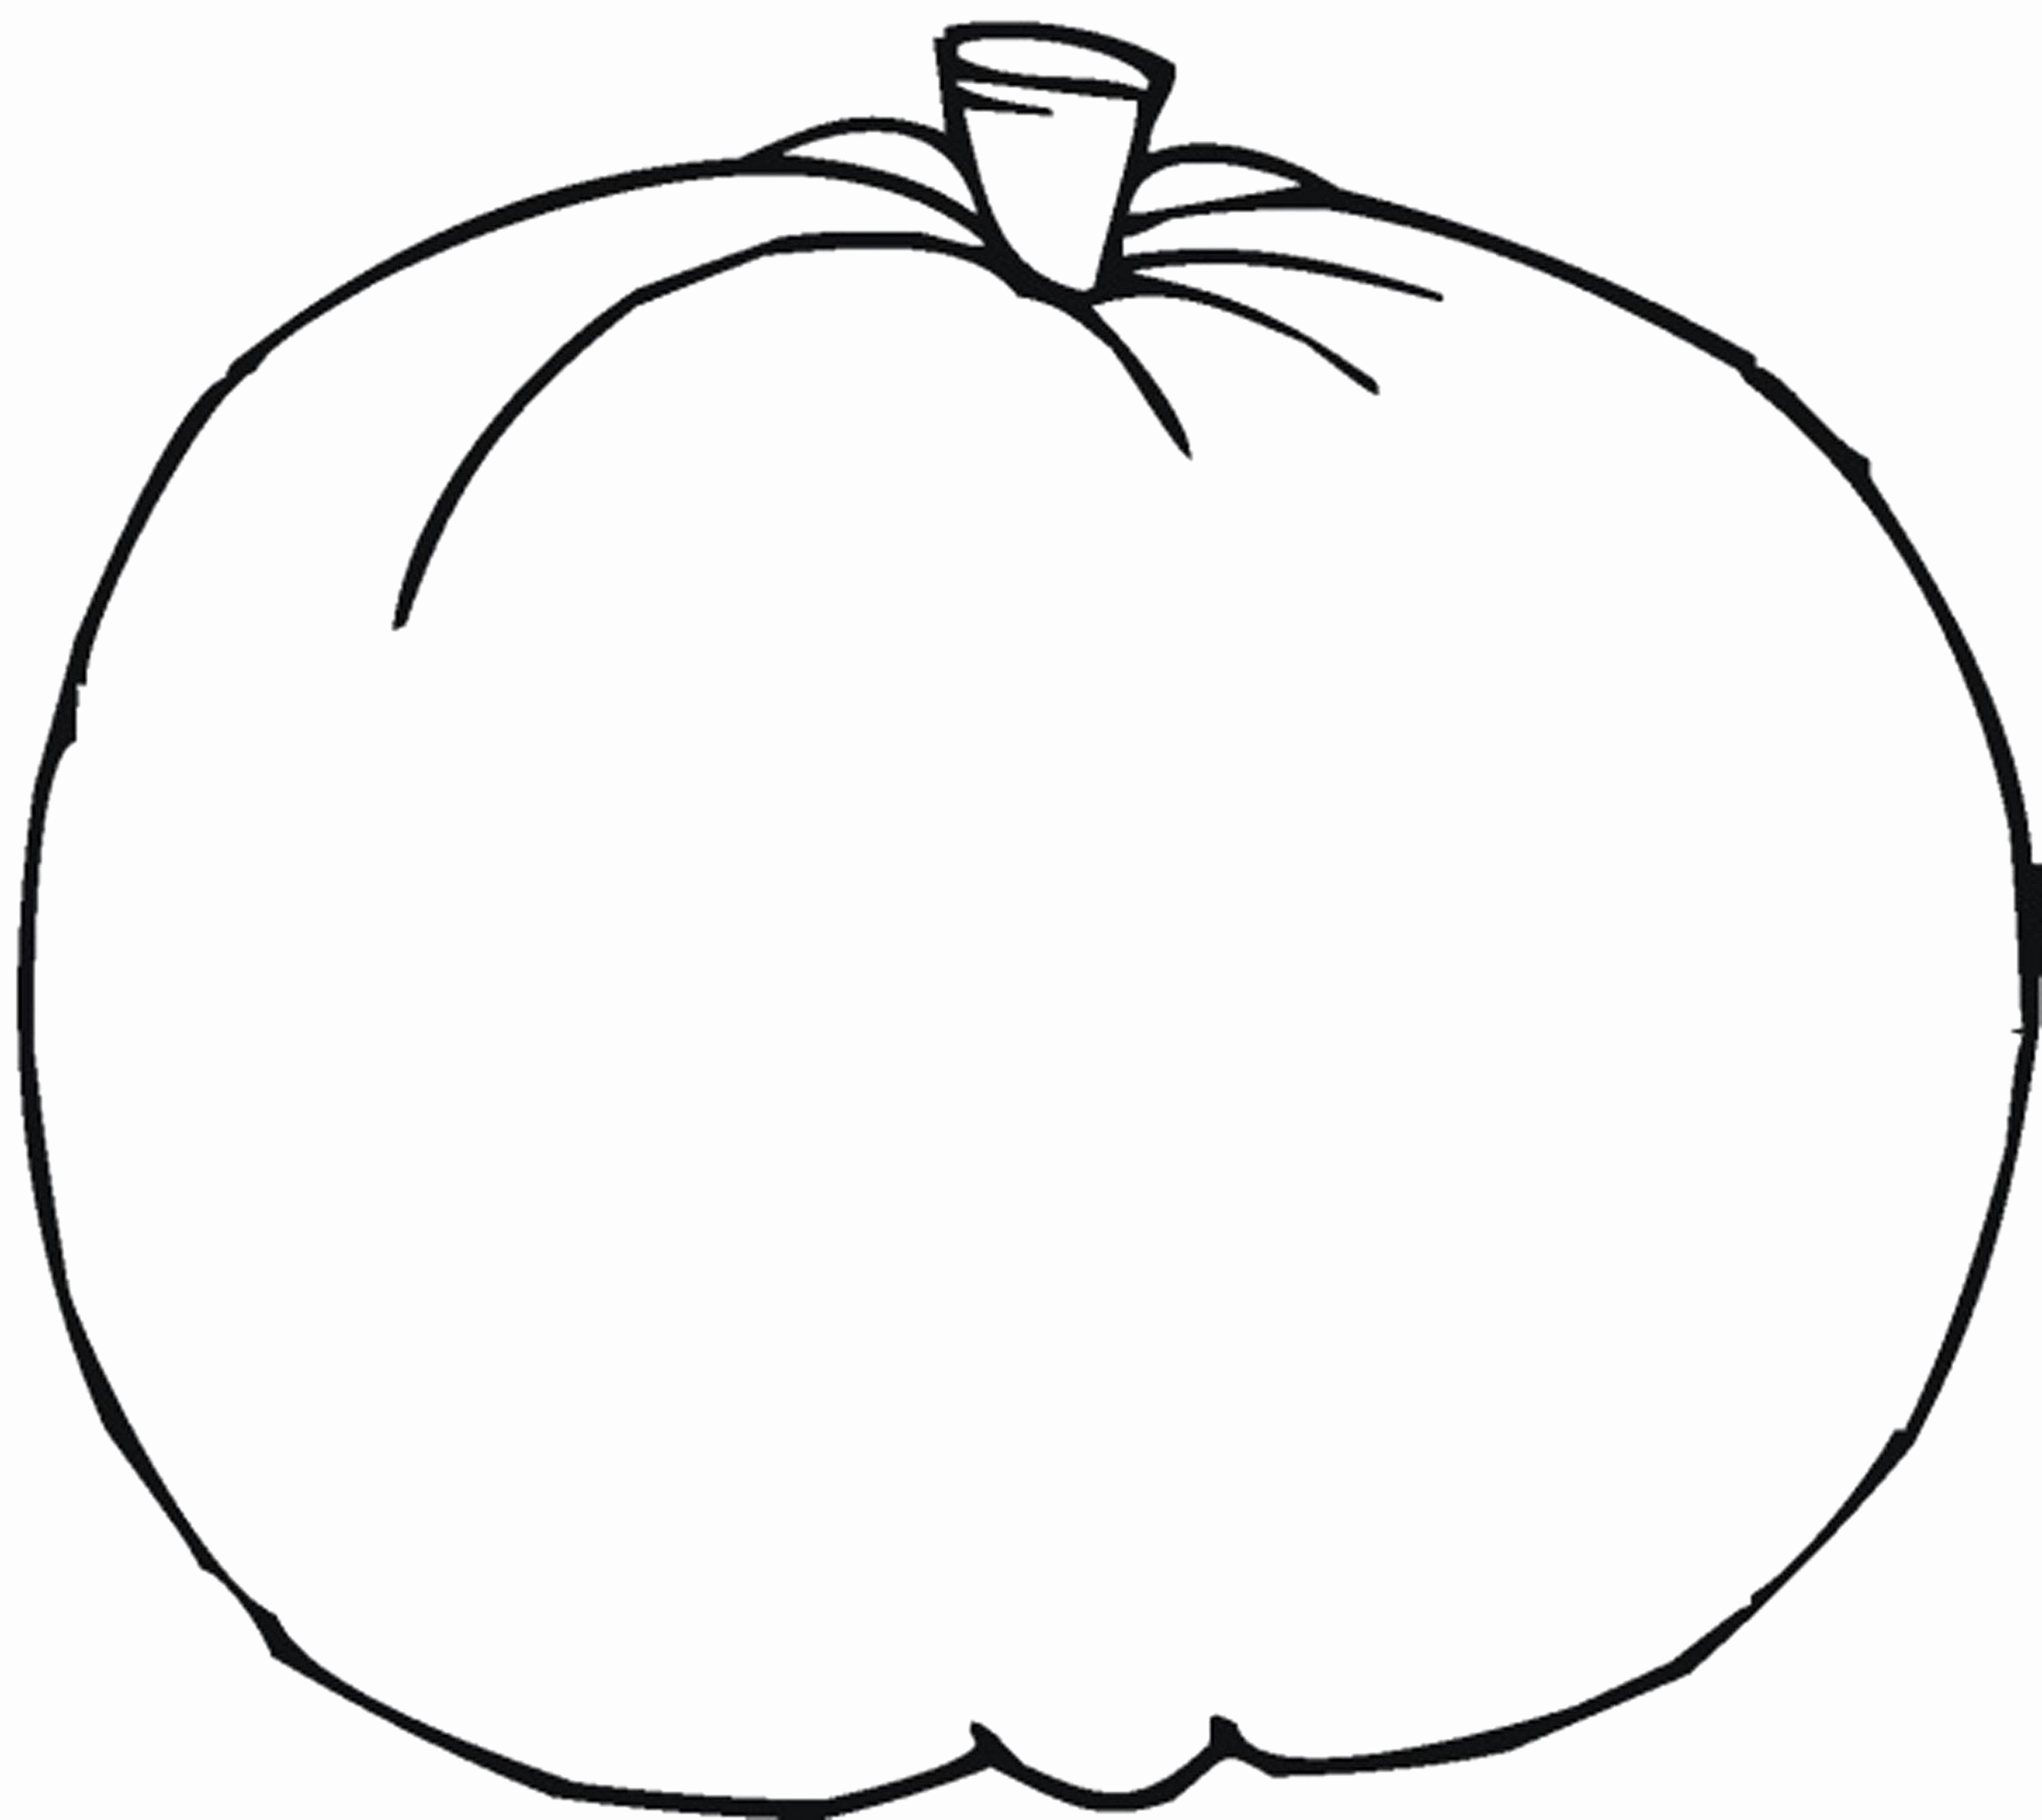 Pumpkin Coloring Pages To Print at GetColorings com Free printable